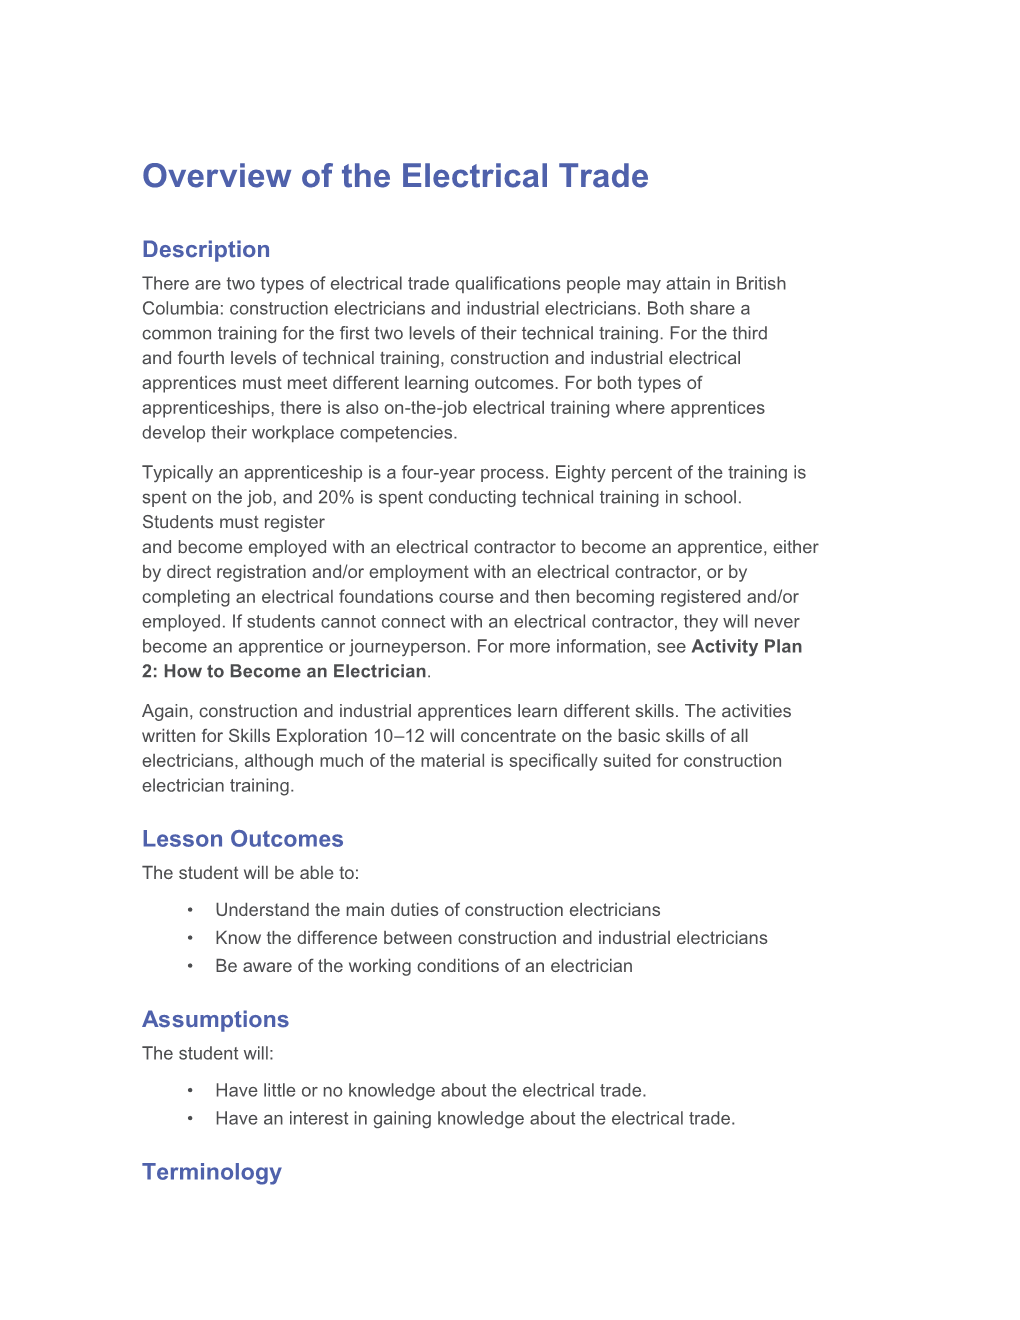 Overview of the Electrical Trade